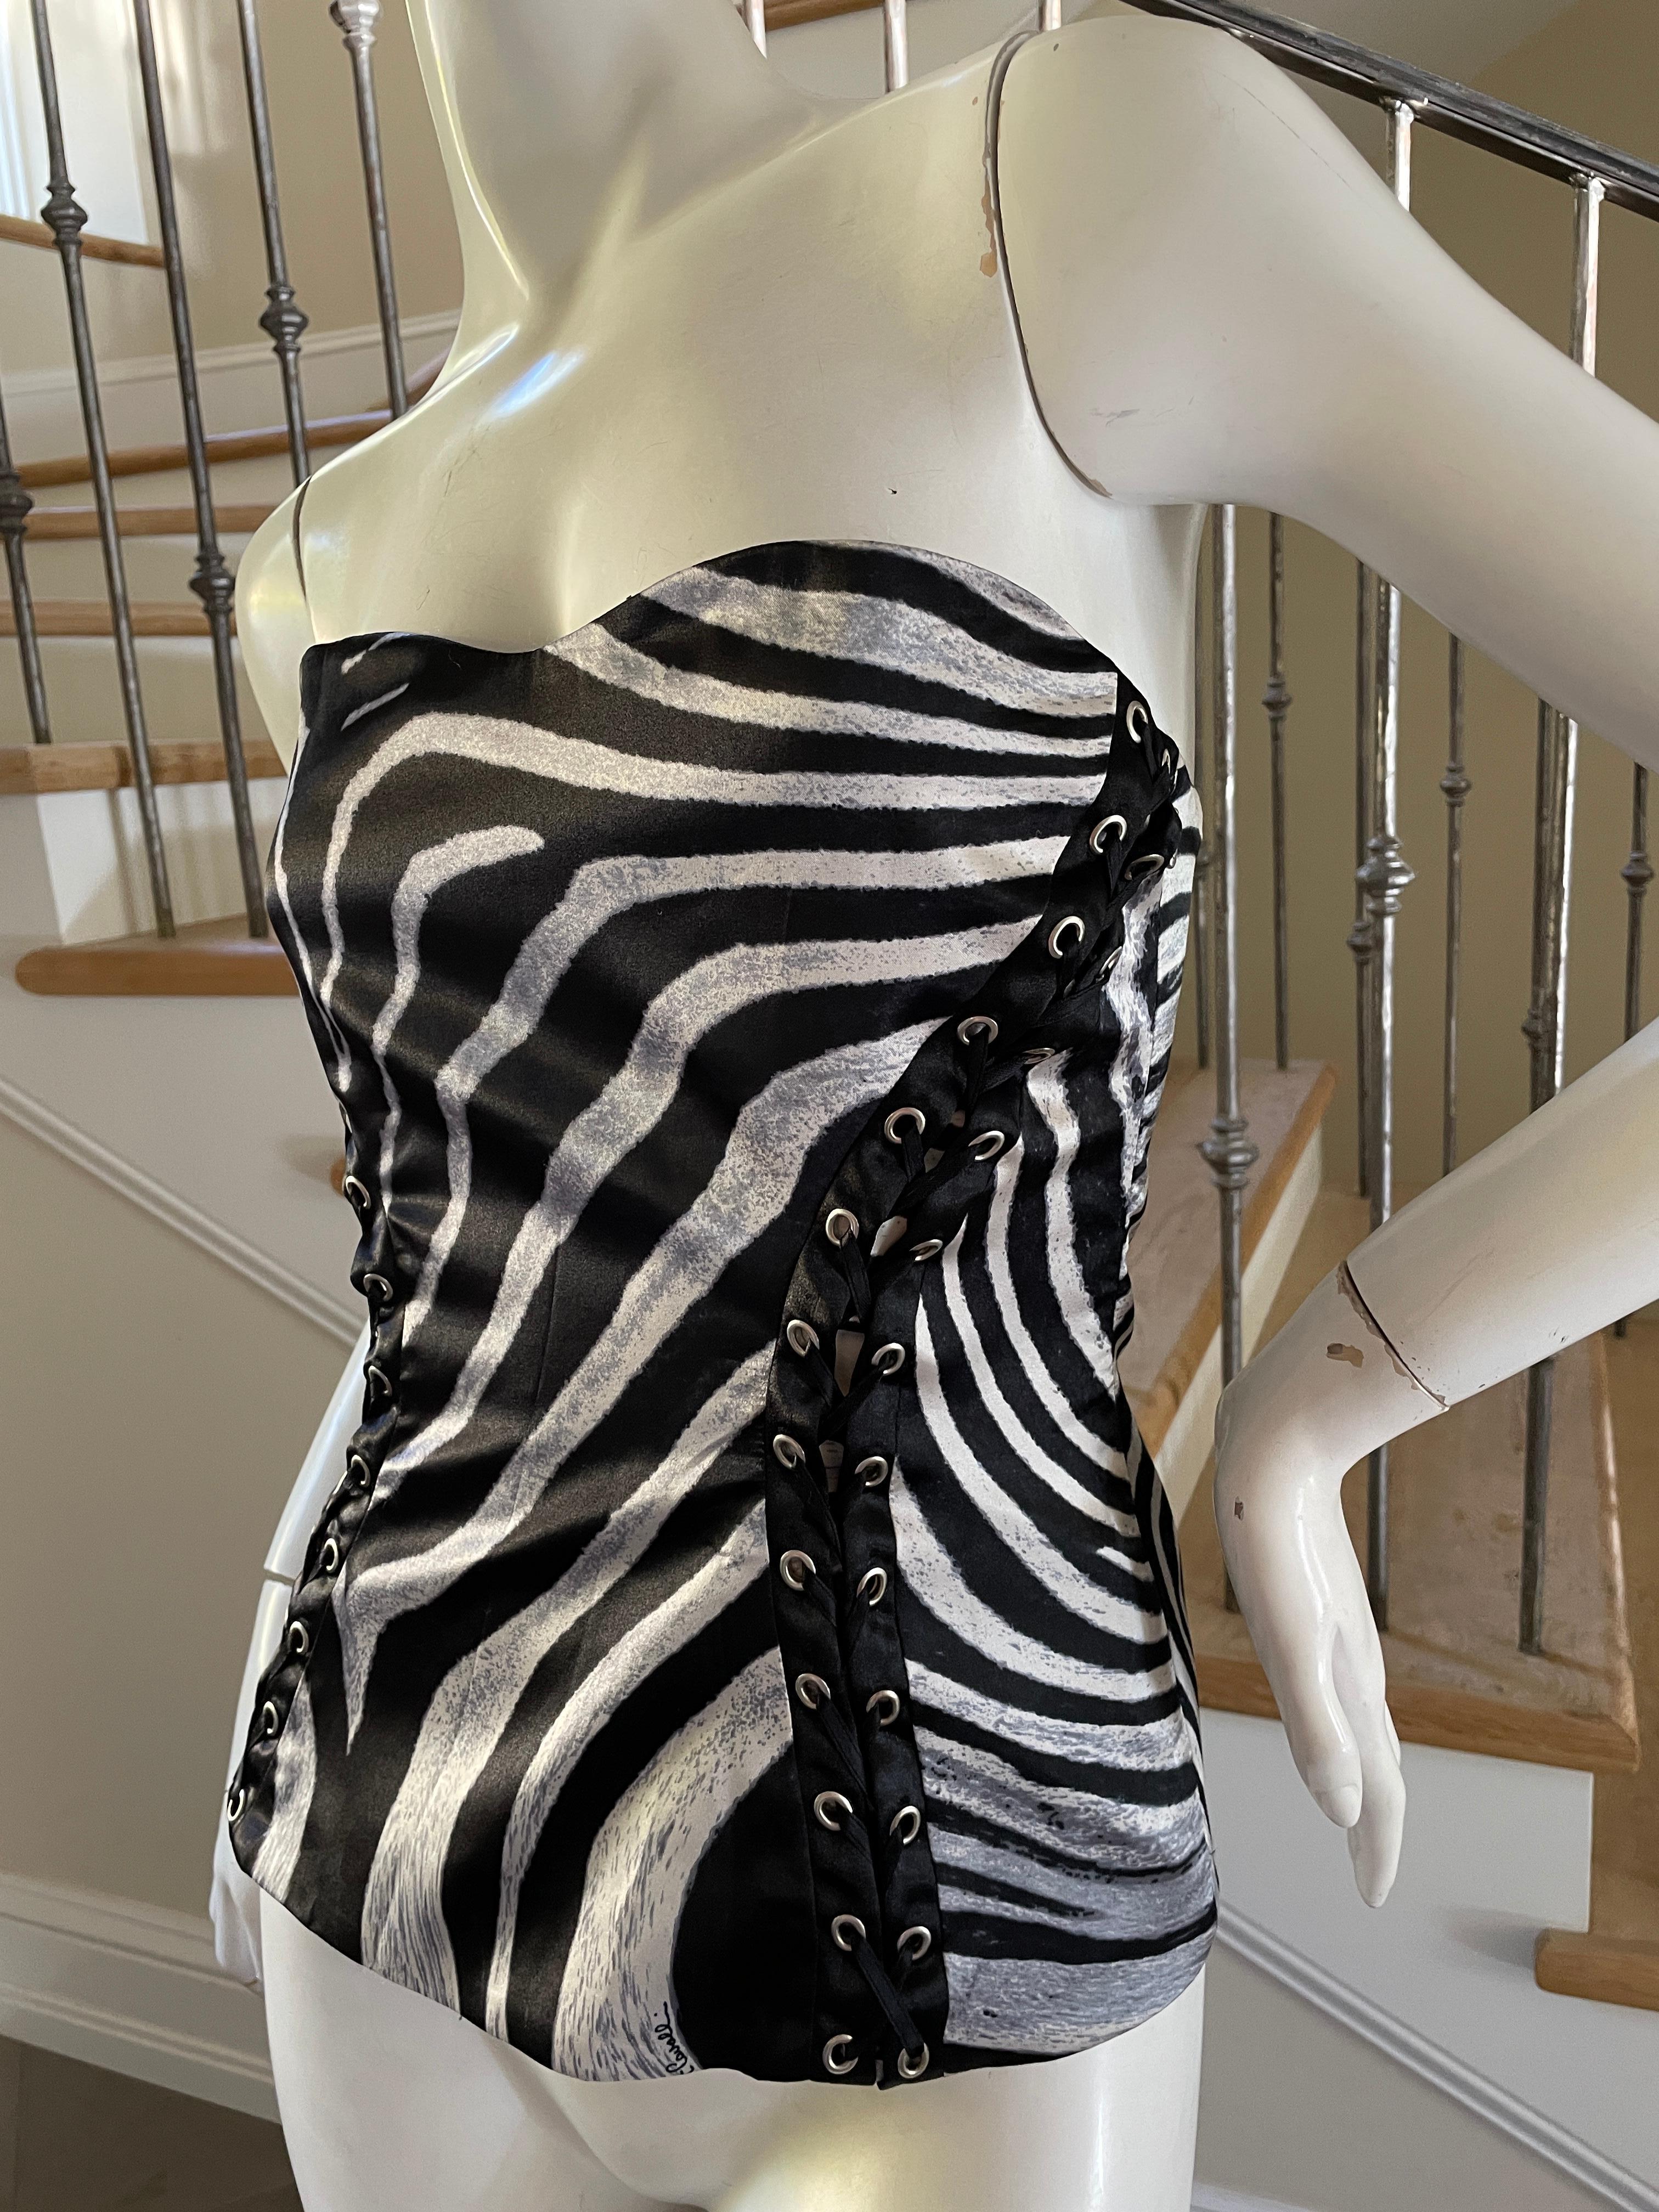 Roberto Cavalli for Just Cavalli Zebra Print Corset with Lace Up Details  For Sale 4